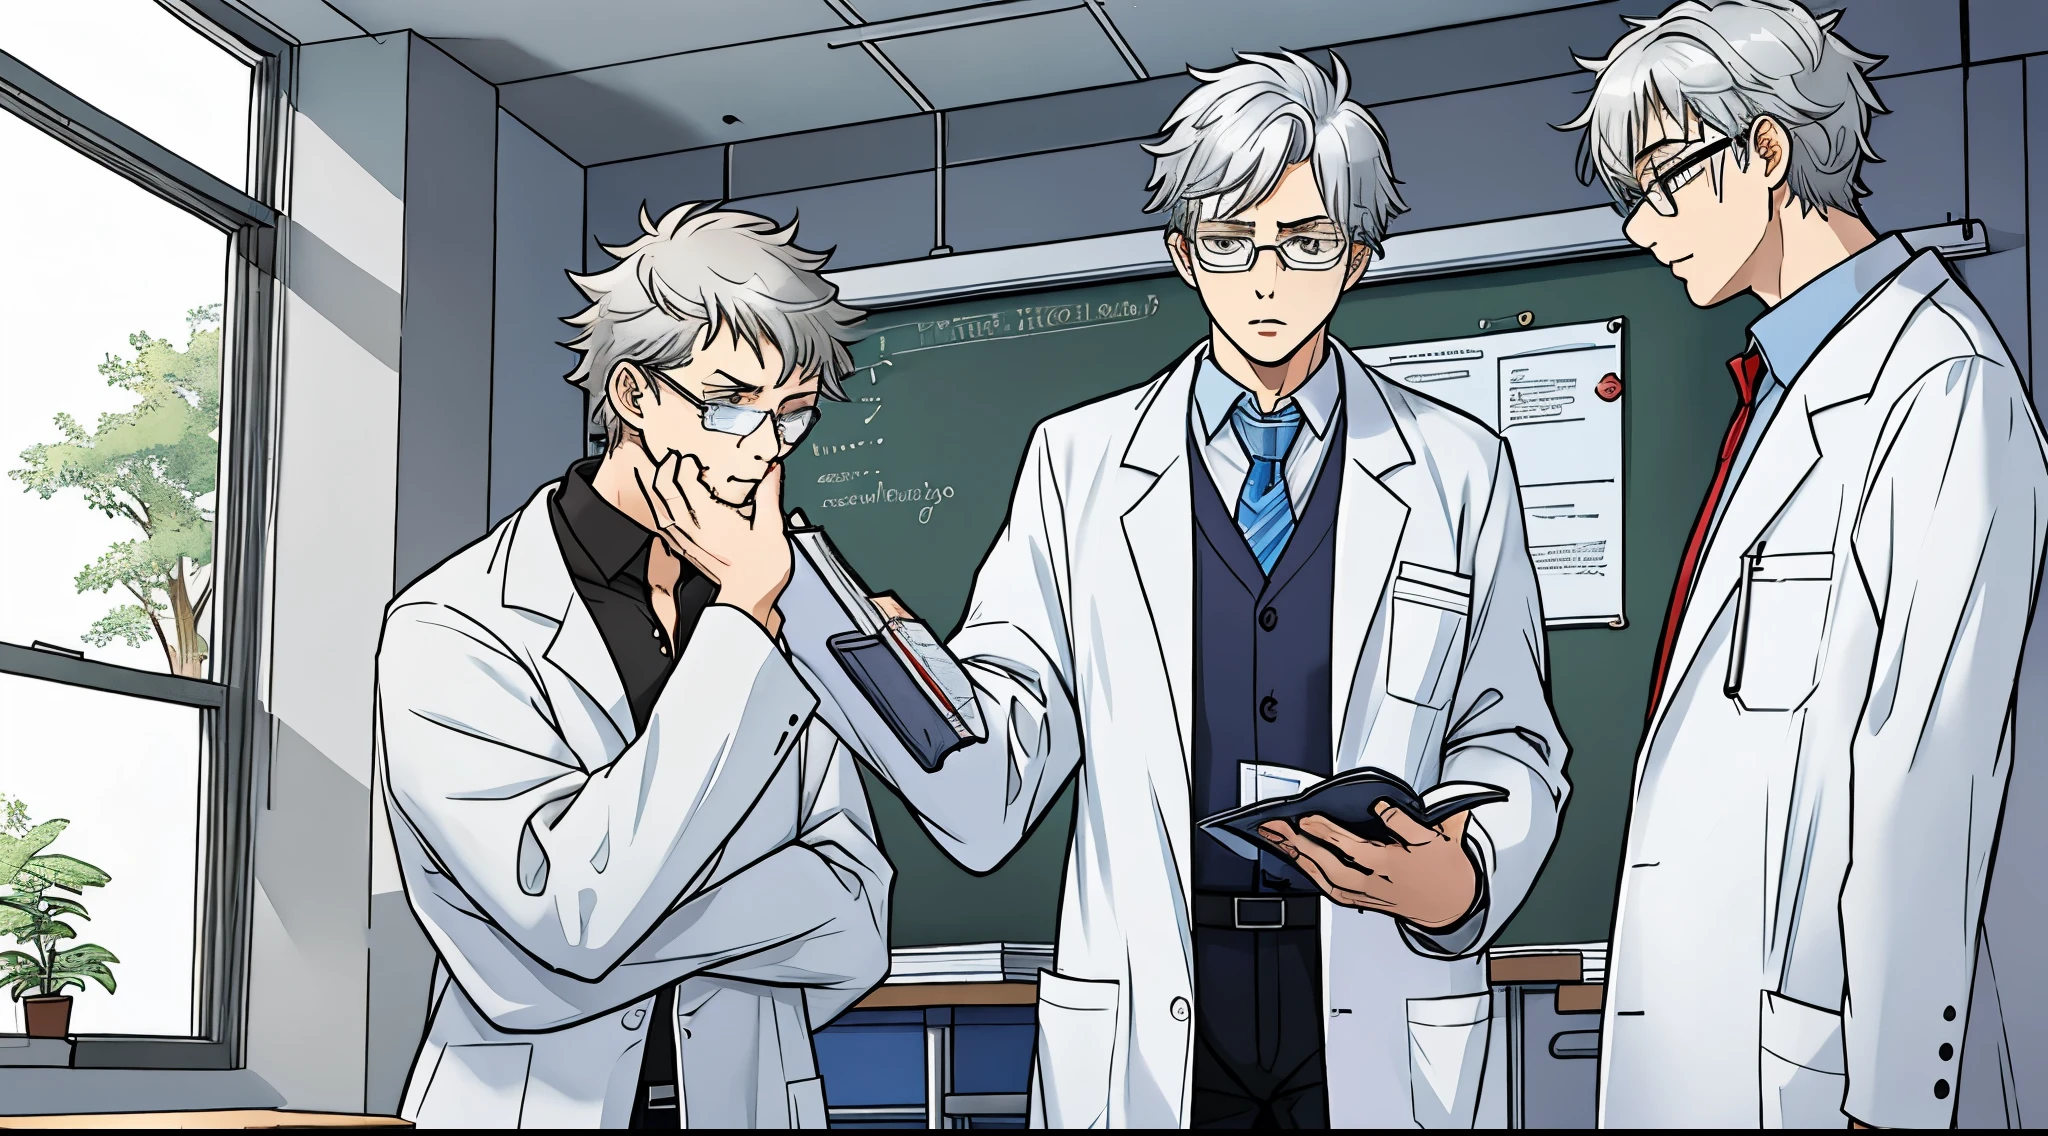 Silver haired teacher wearing lab coat and medical glasses, he looks scared